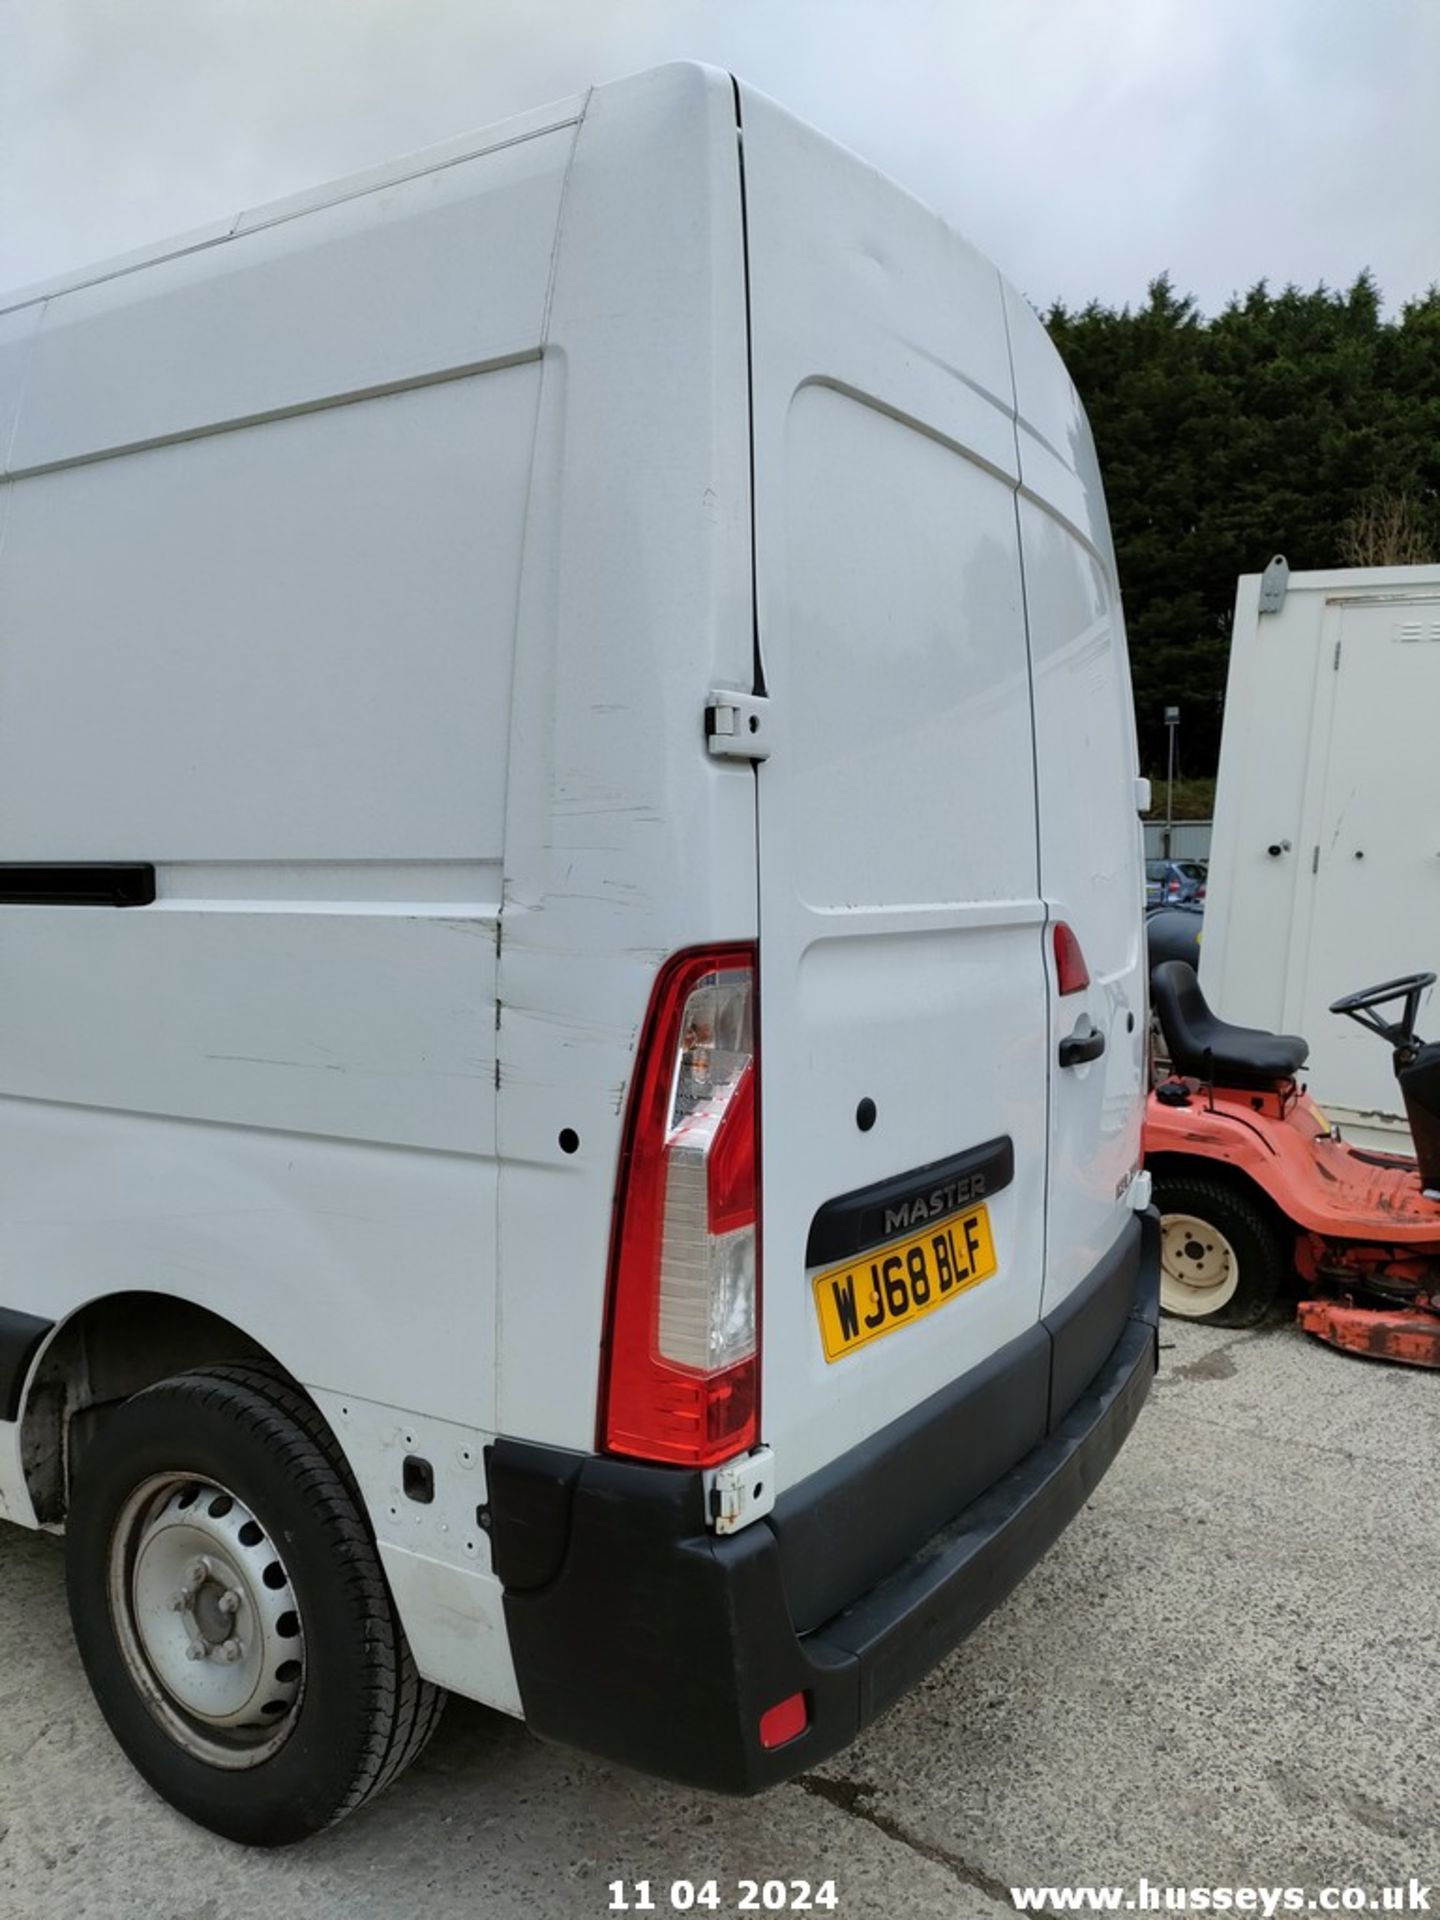 18/68 RENAULT MASTER LM35 BUSINESS DCI - 2298cc 5dr Van (White) - Image 33 of 68